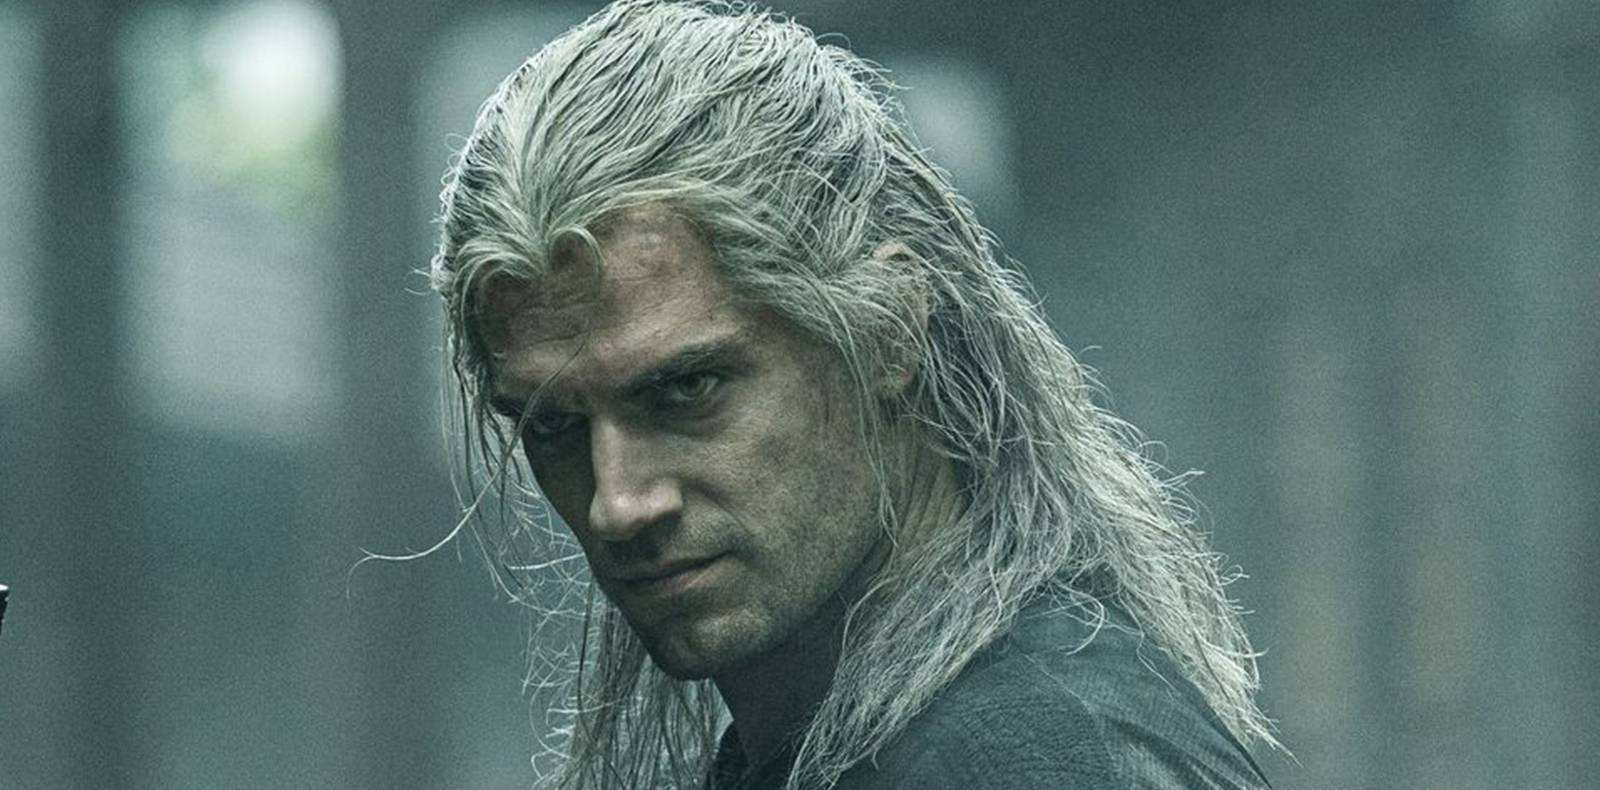 Who is Henry Cavill, hero of “The Witcher”?